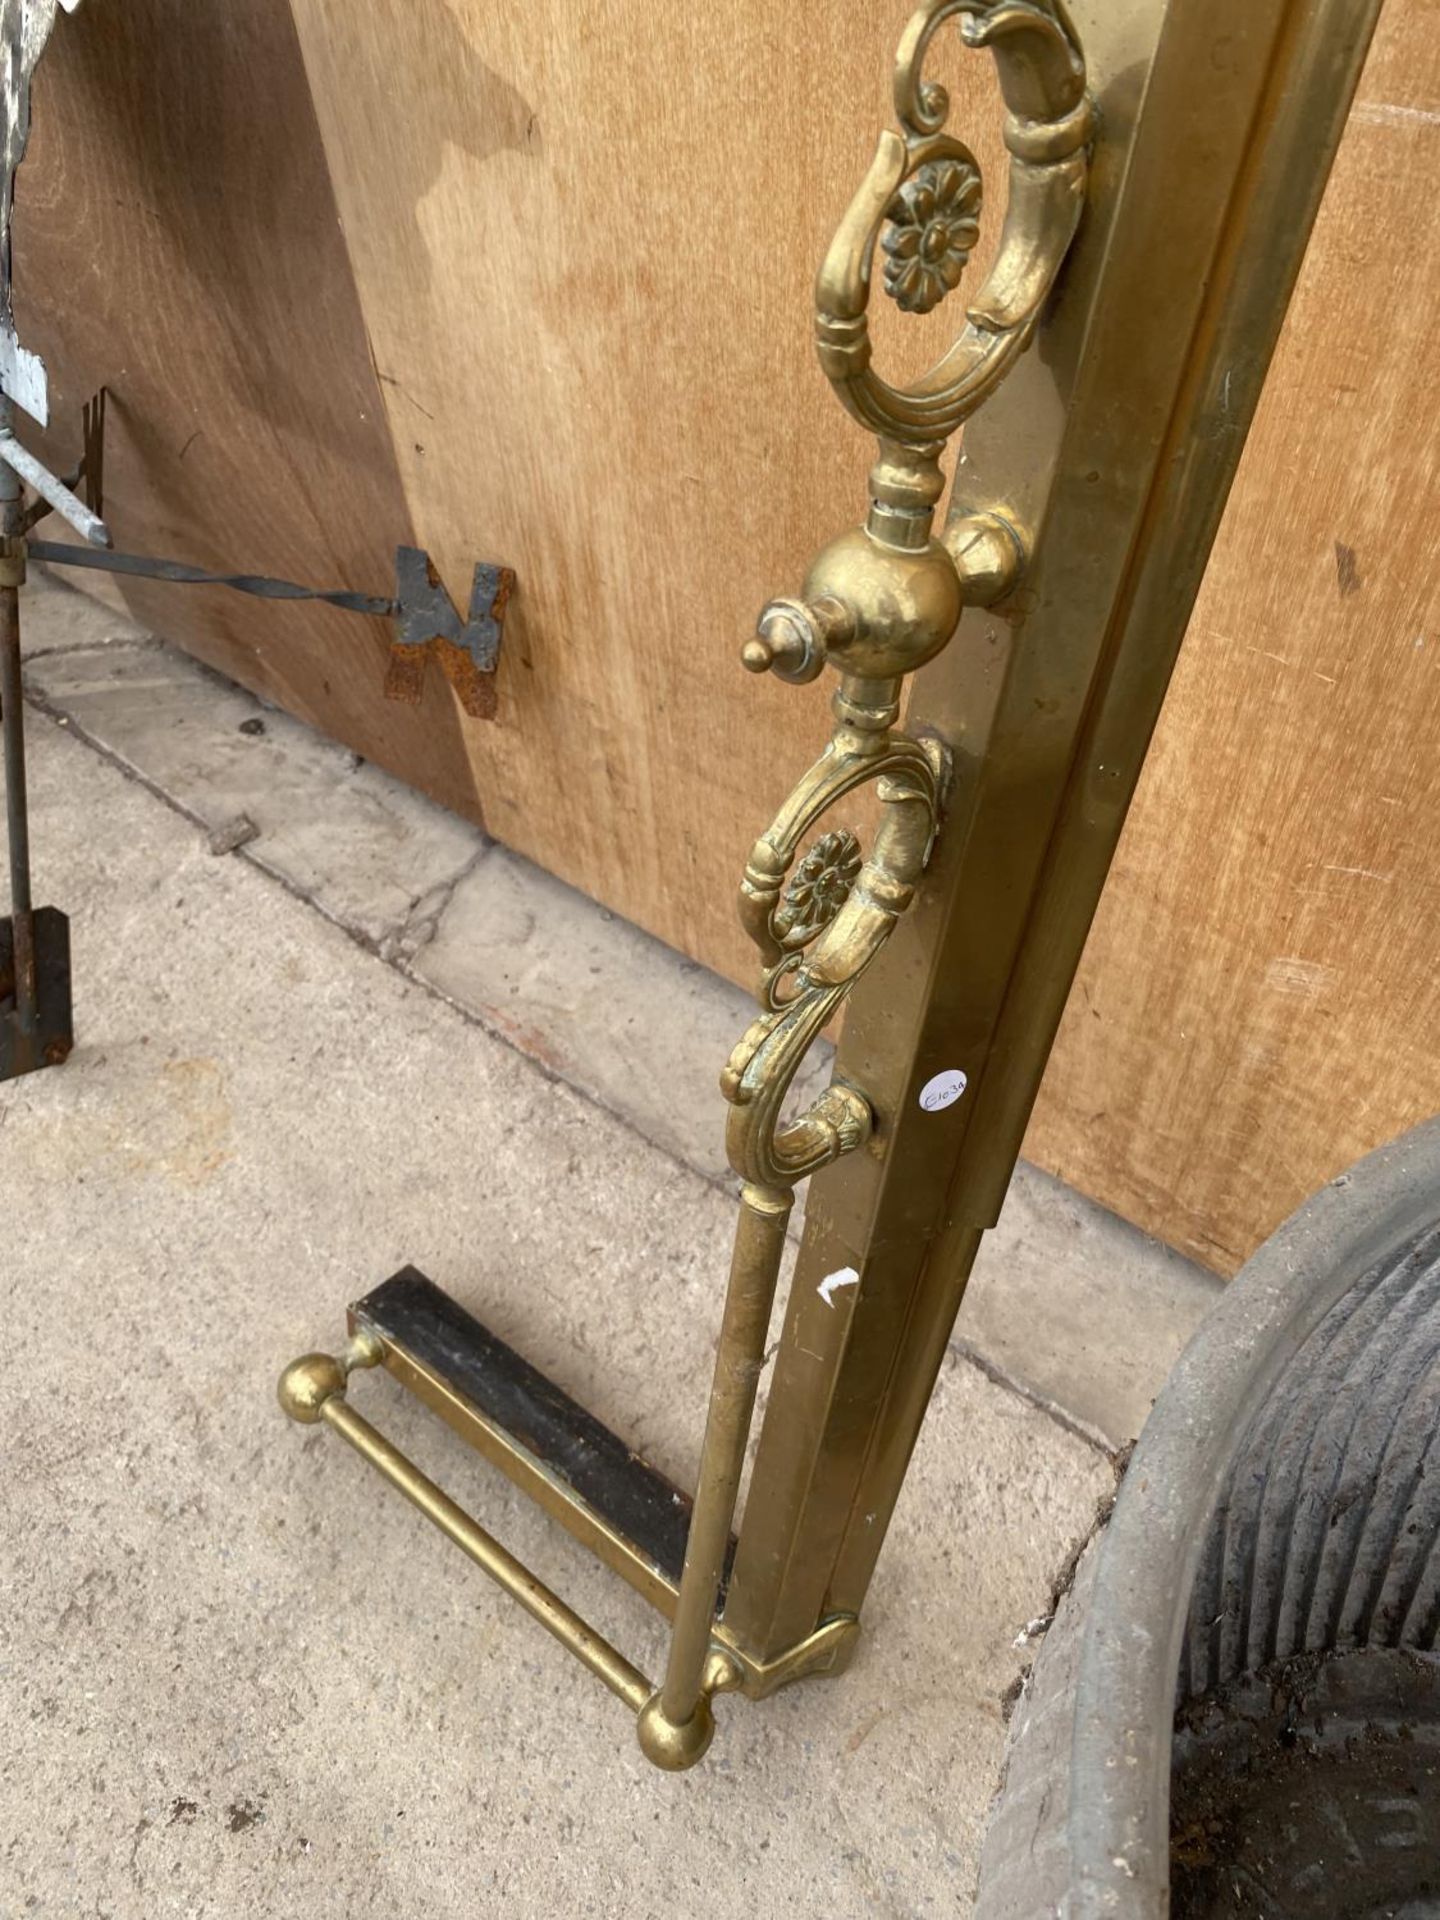 A DECORATIVE BRASS FIRE FENDER - Image 3 of 3